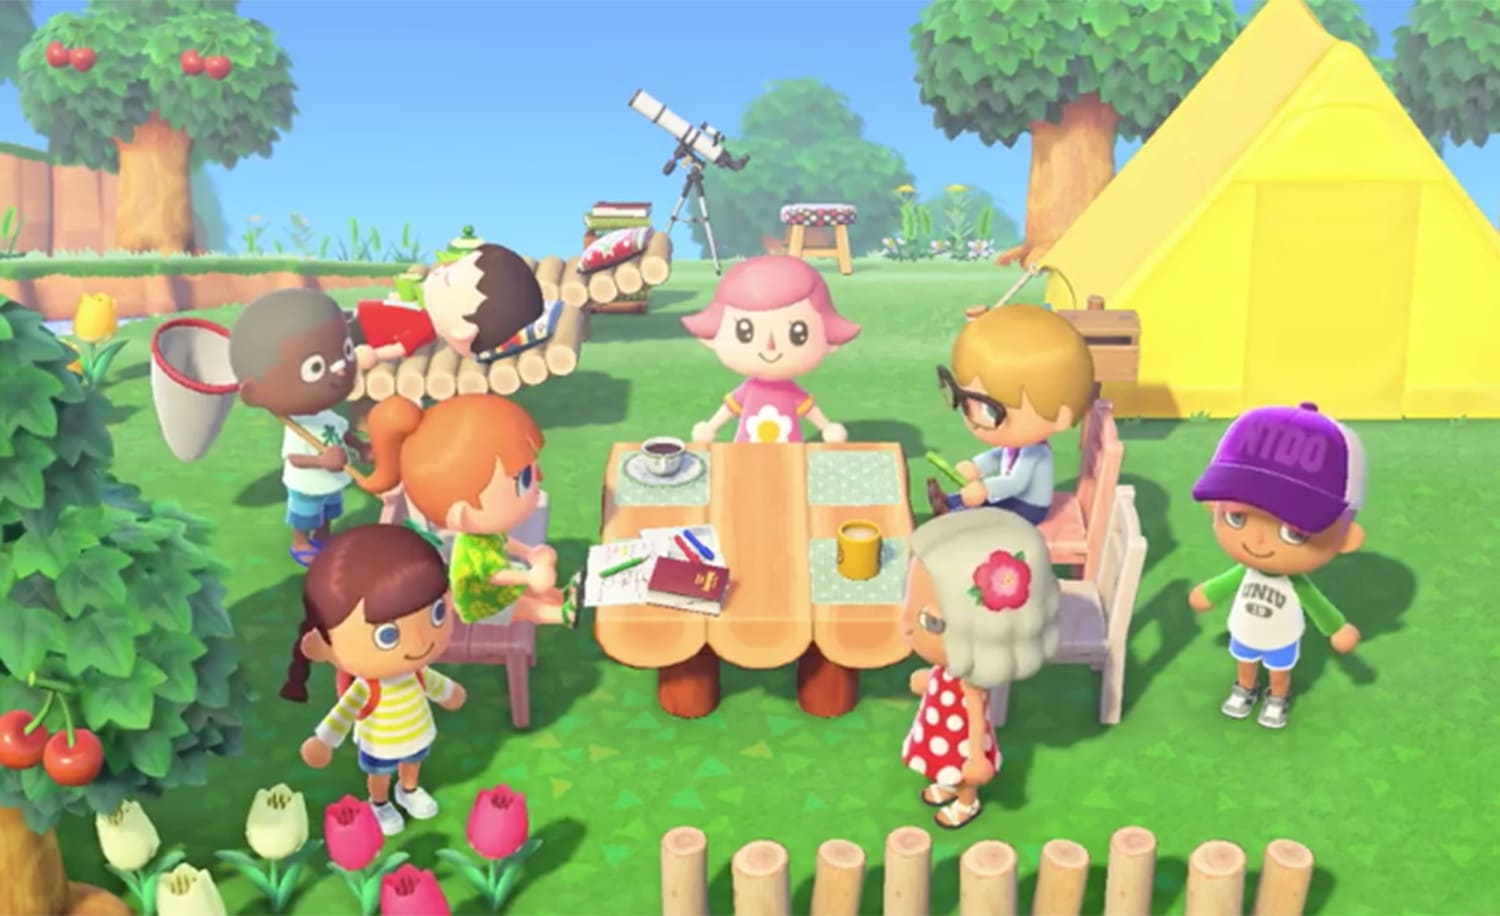 Is Nintendo S Animal Crossing New Horizons Game For Kids